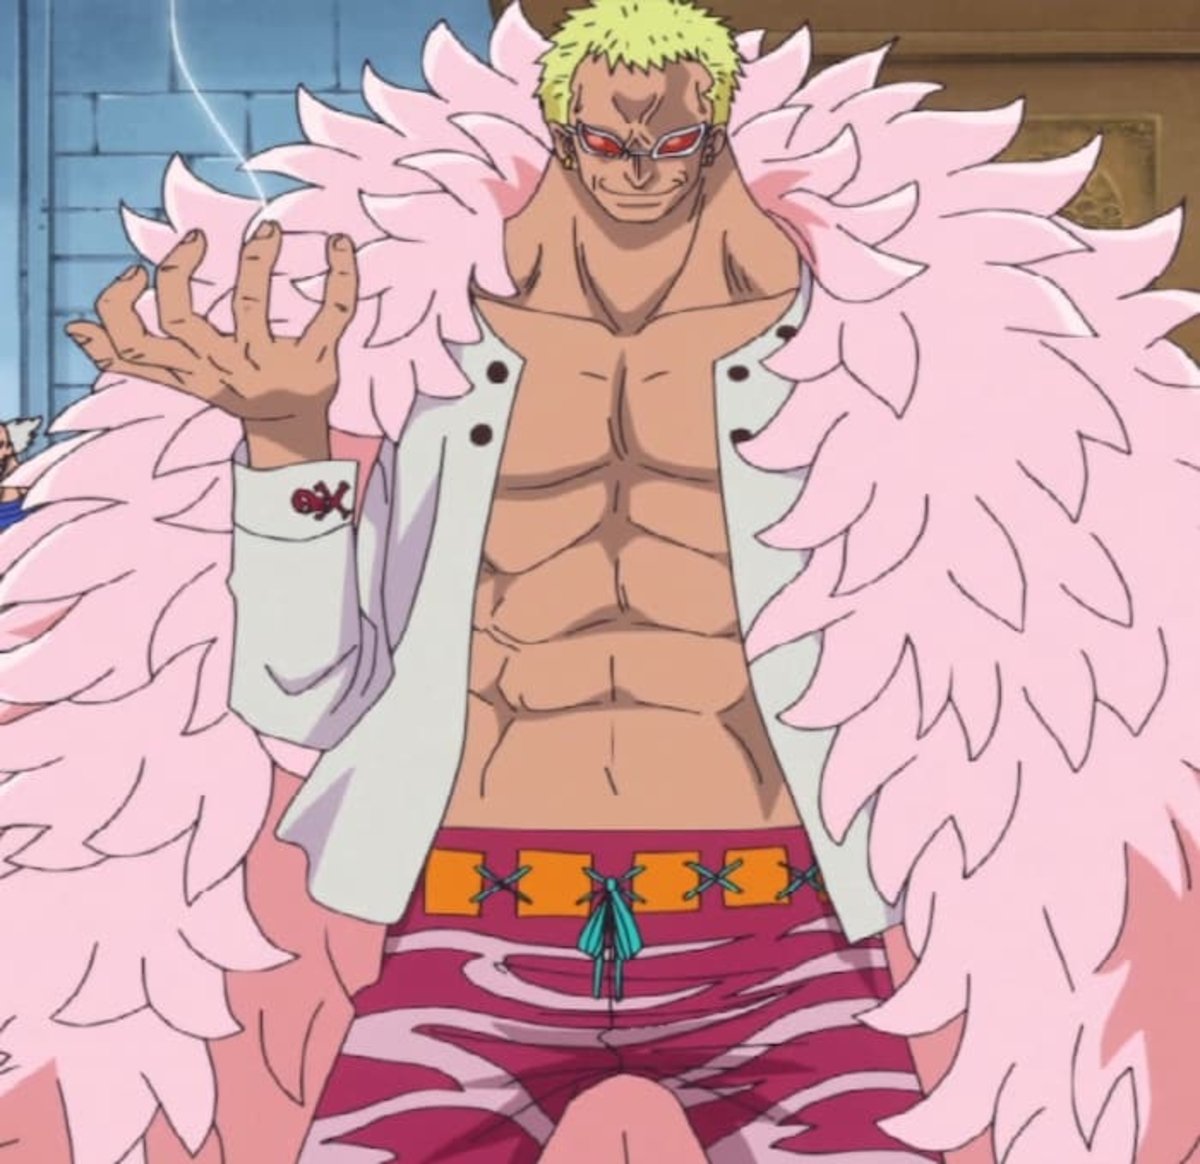 Doflamingo was the most powerful villain in the Dressrosa arc, however that changed when he met Kaido